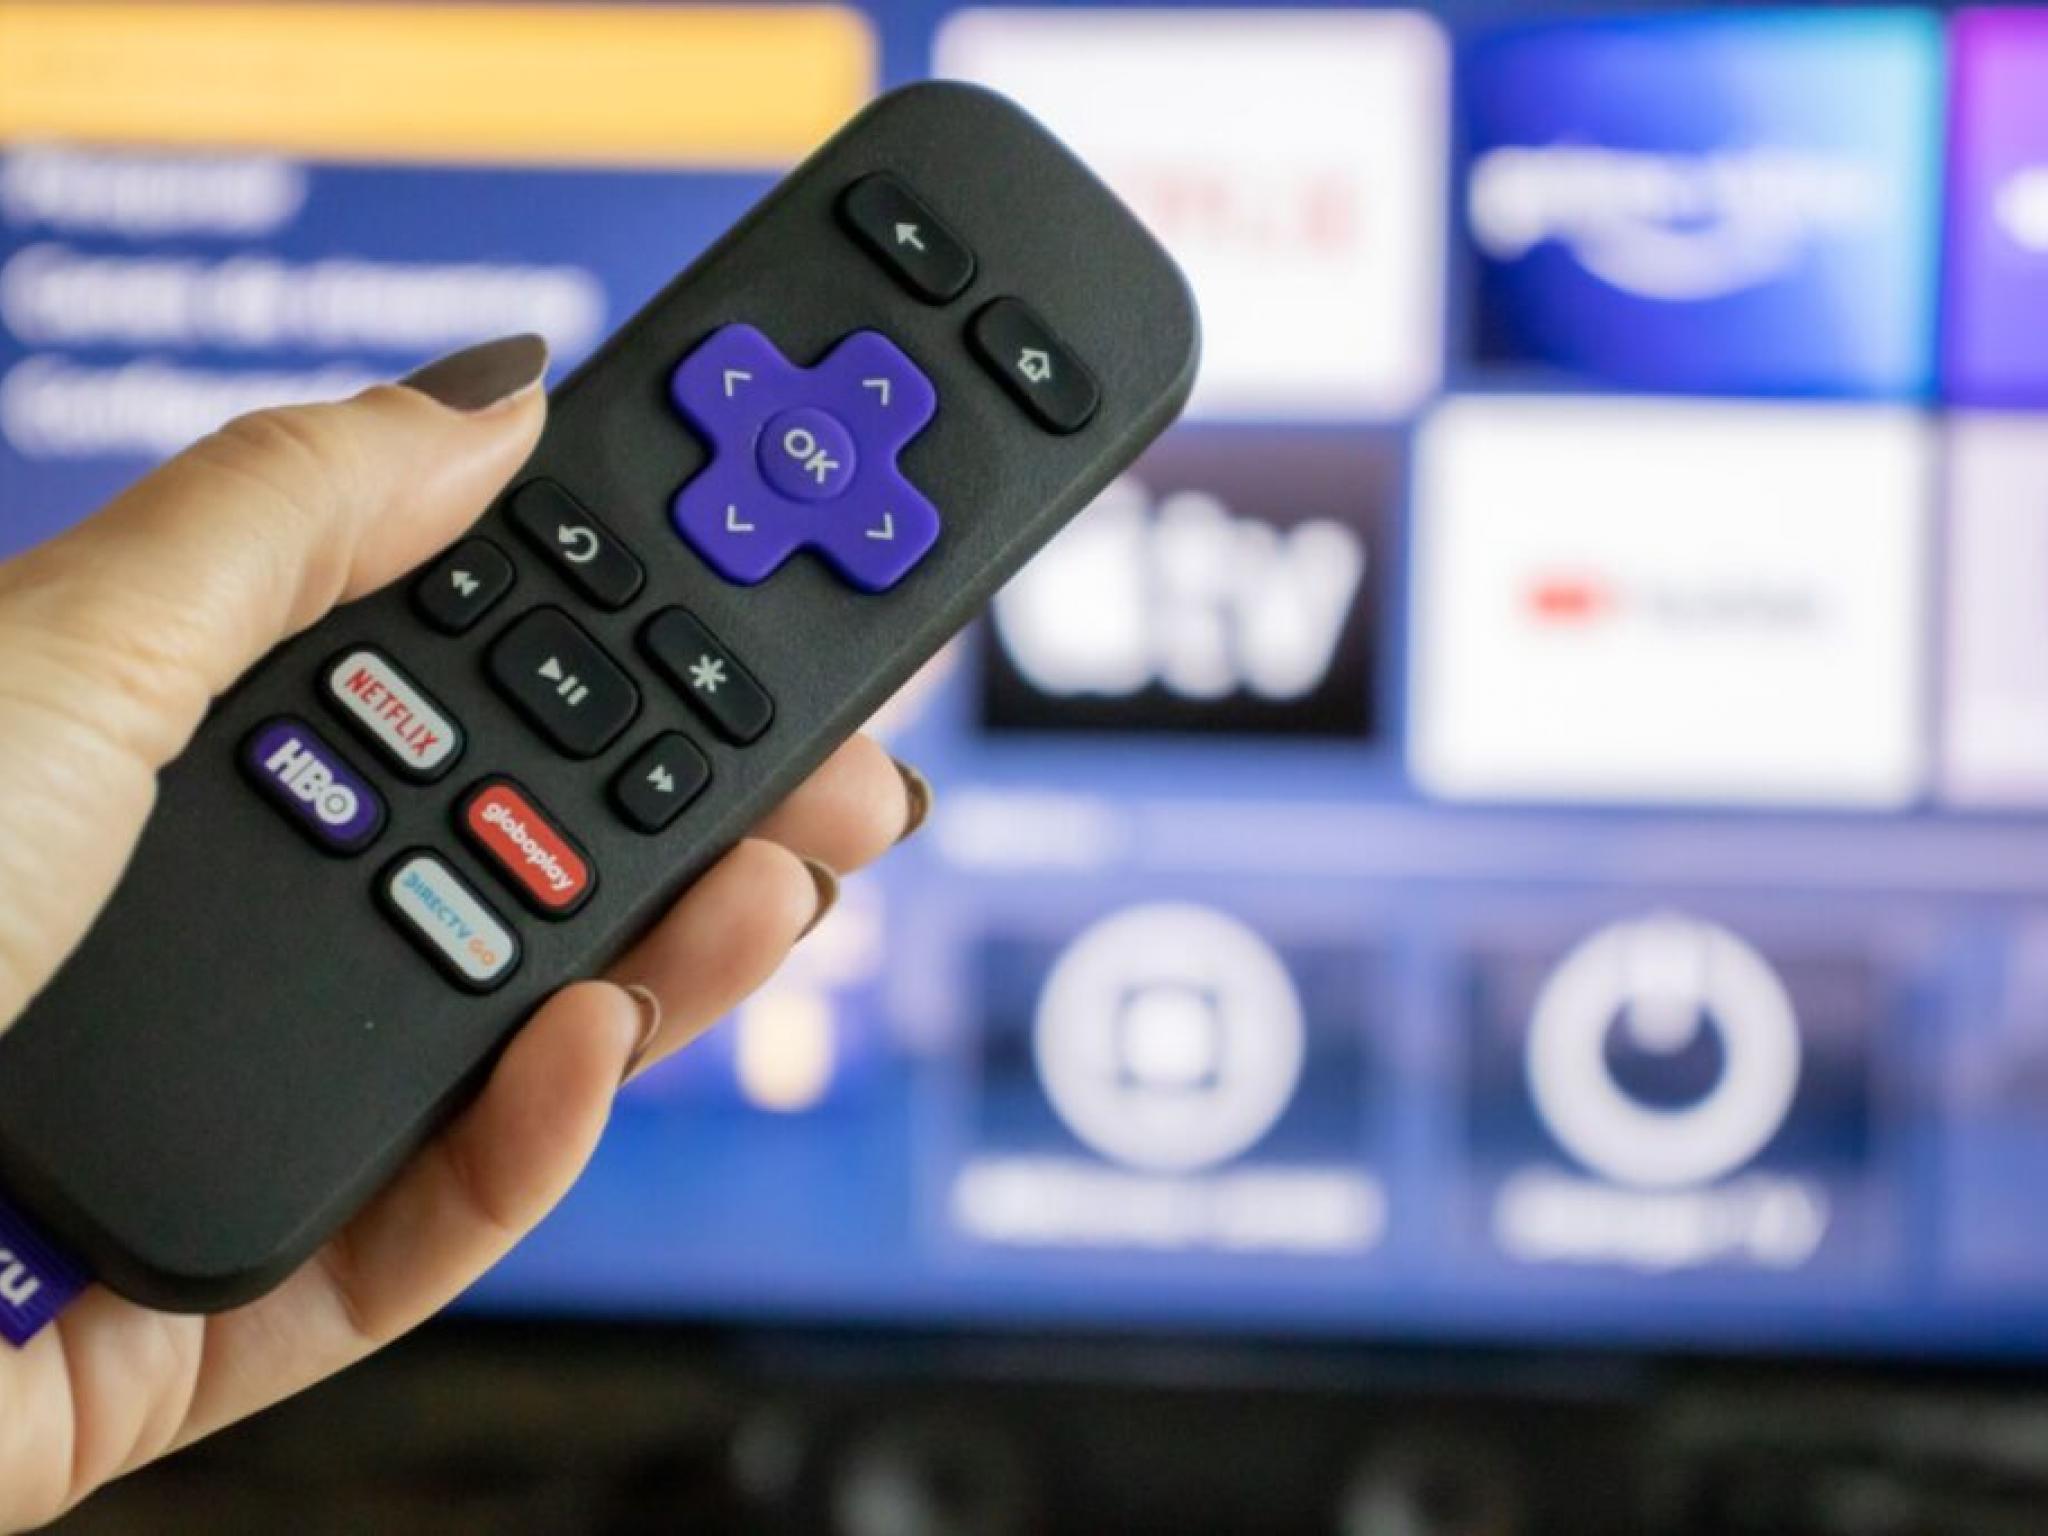  game-on-pause-roku-wants-to-fill-that-gap-with-ads-new-patent-shows 